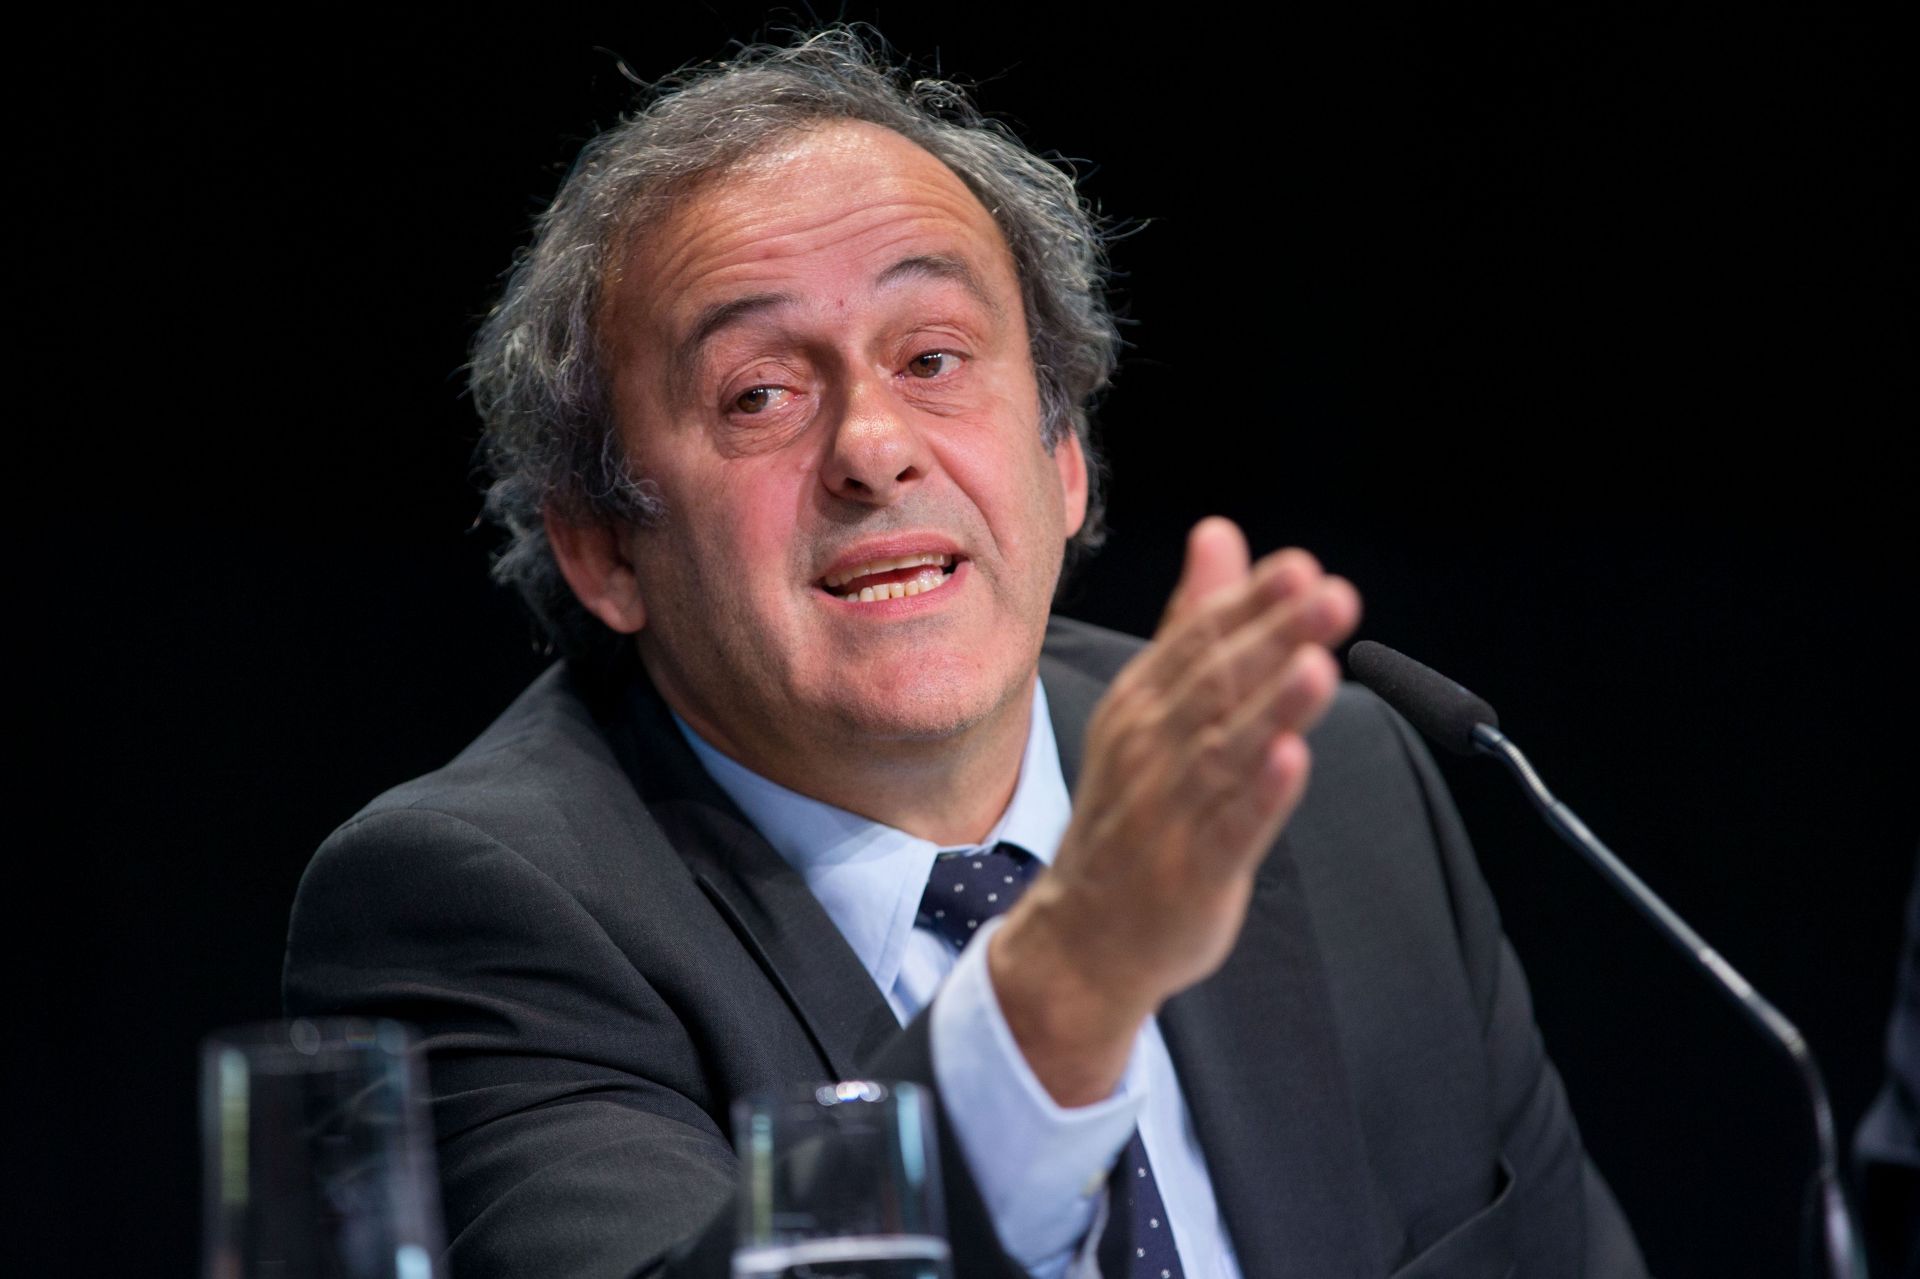 Michel Platini reached the semifinals of the World Cup in 1982 and 1986